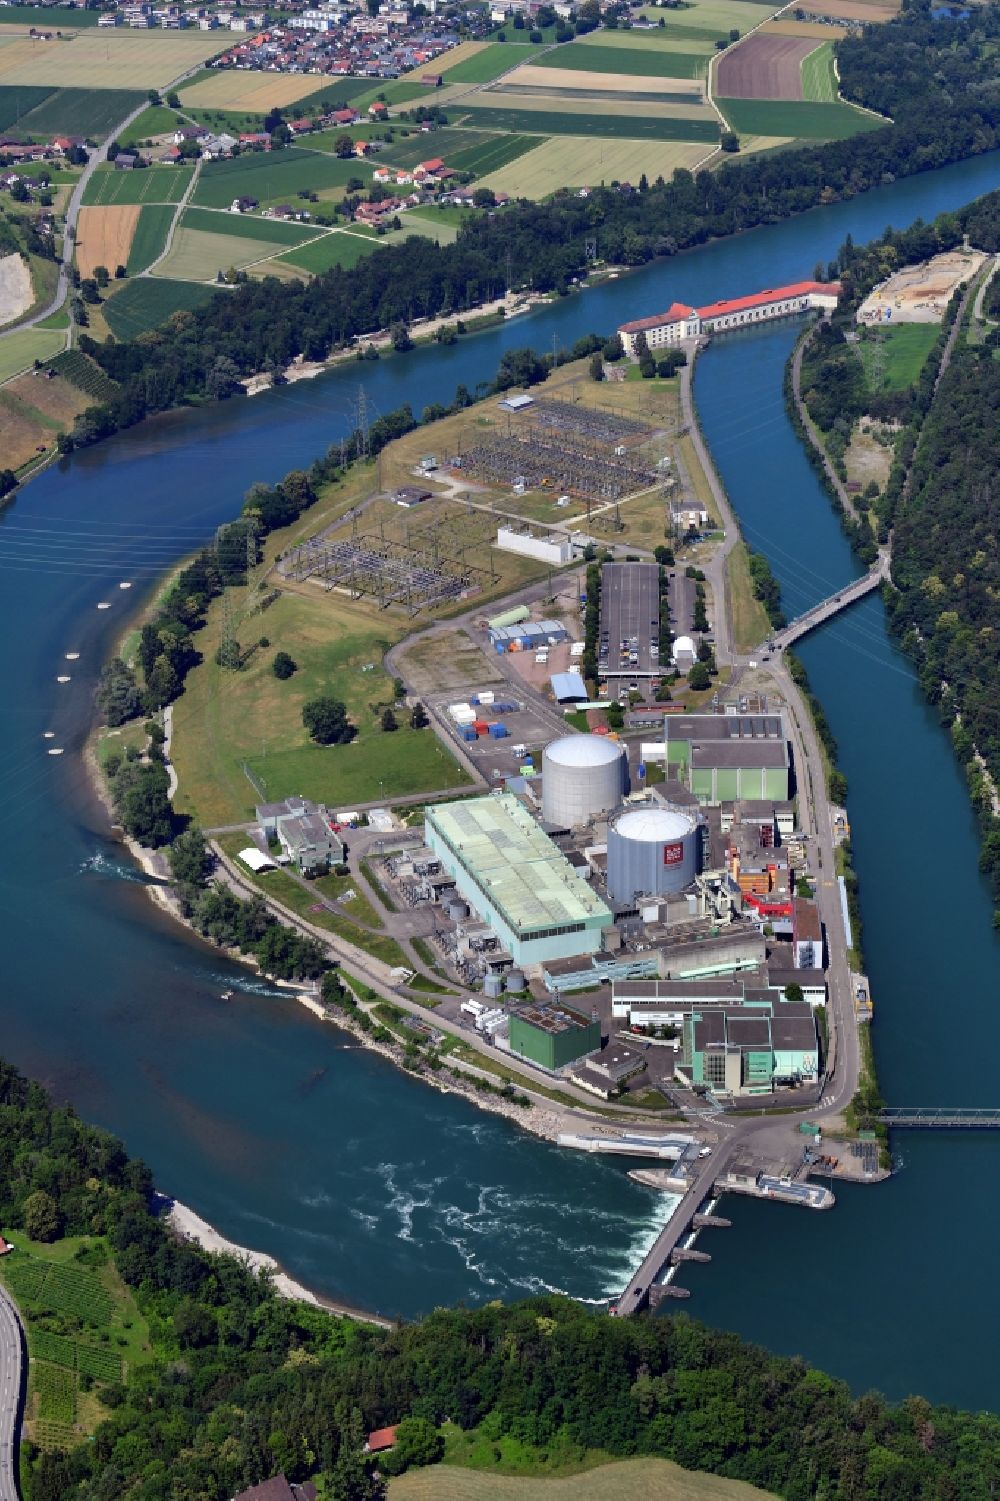 Aerial image Beznau - Building remains of the reactor units and facilities of the NPP nuclear power plant on river of Aare in Beznau in the canton Aargau, Switzerland